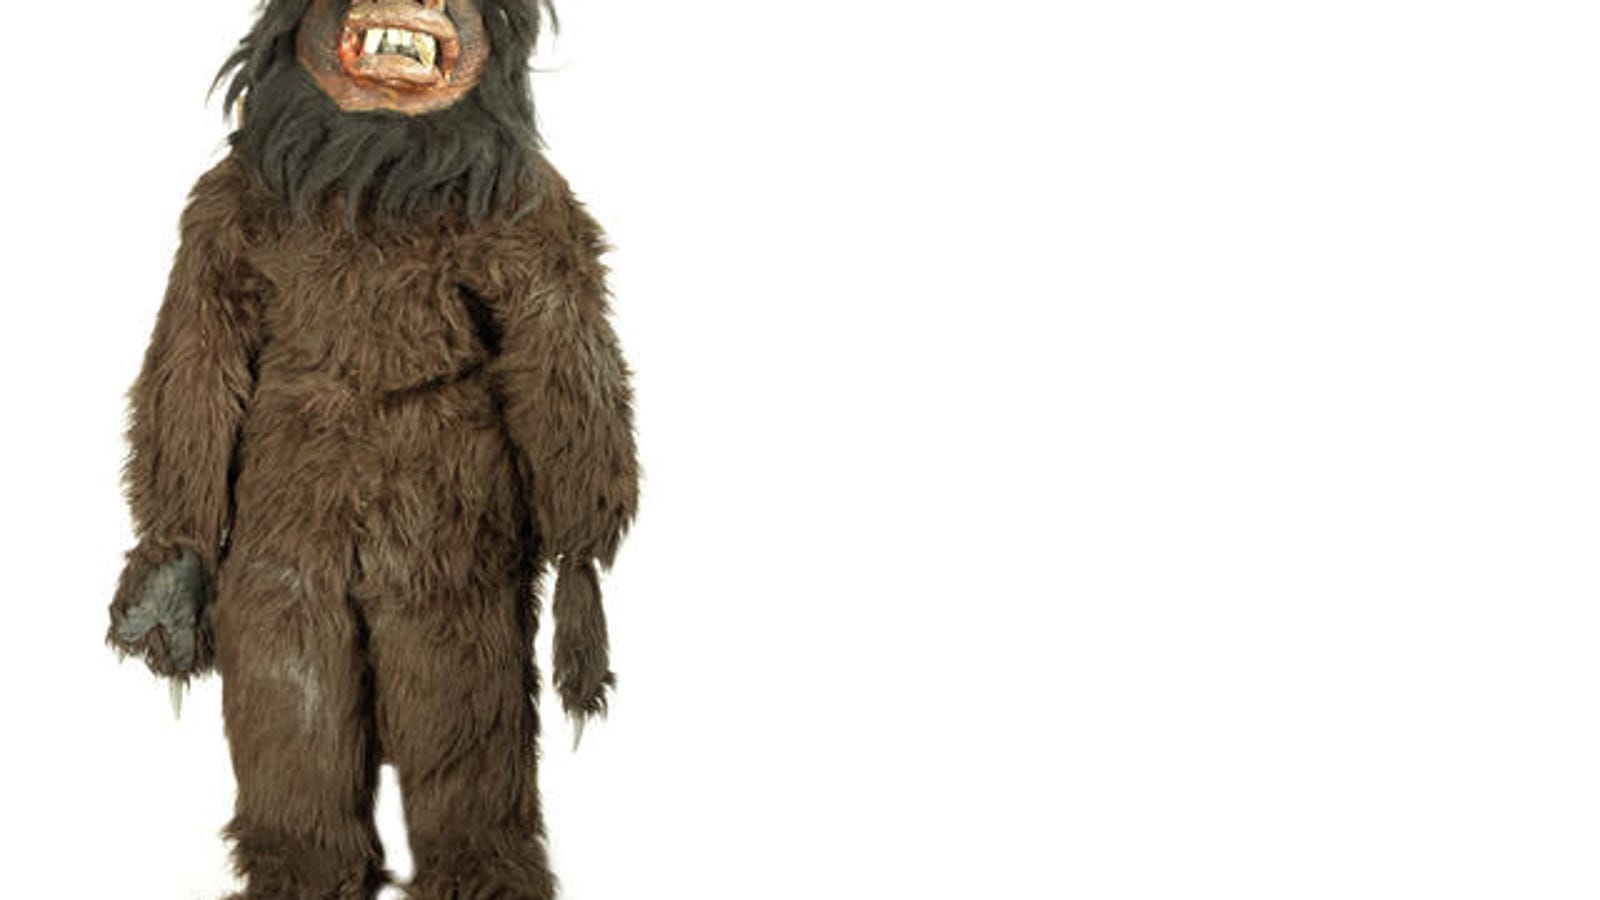 Own One of the Worst Doctor Who Monster Costumes in History